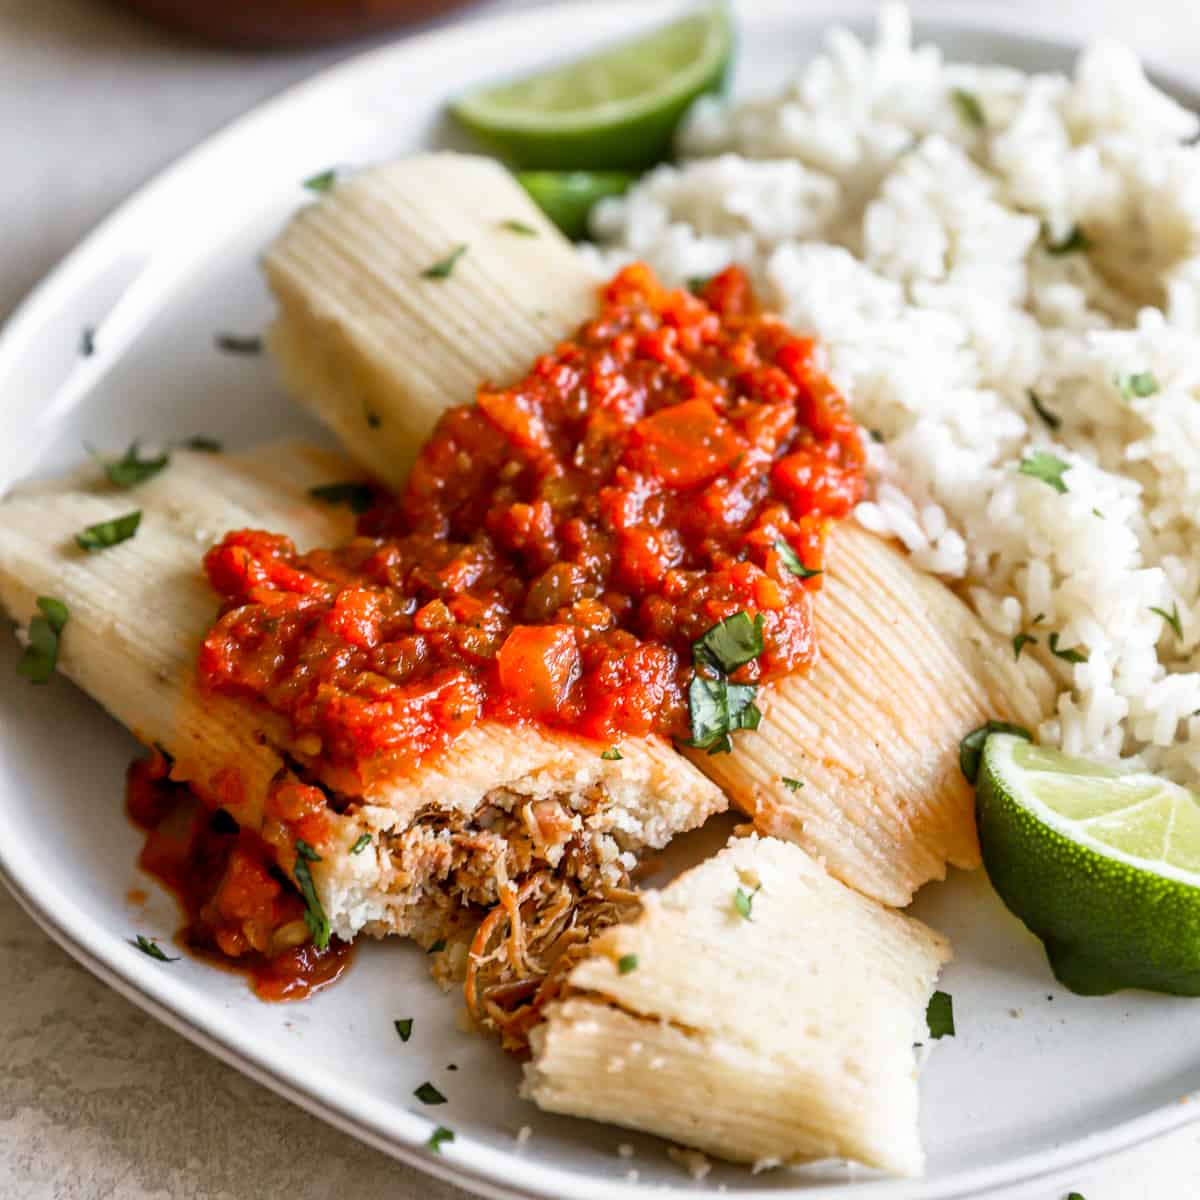 Mexican Tamales Making Kit - 5 items5 items